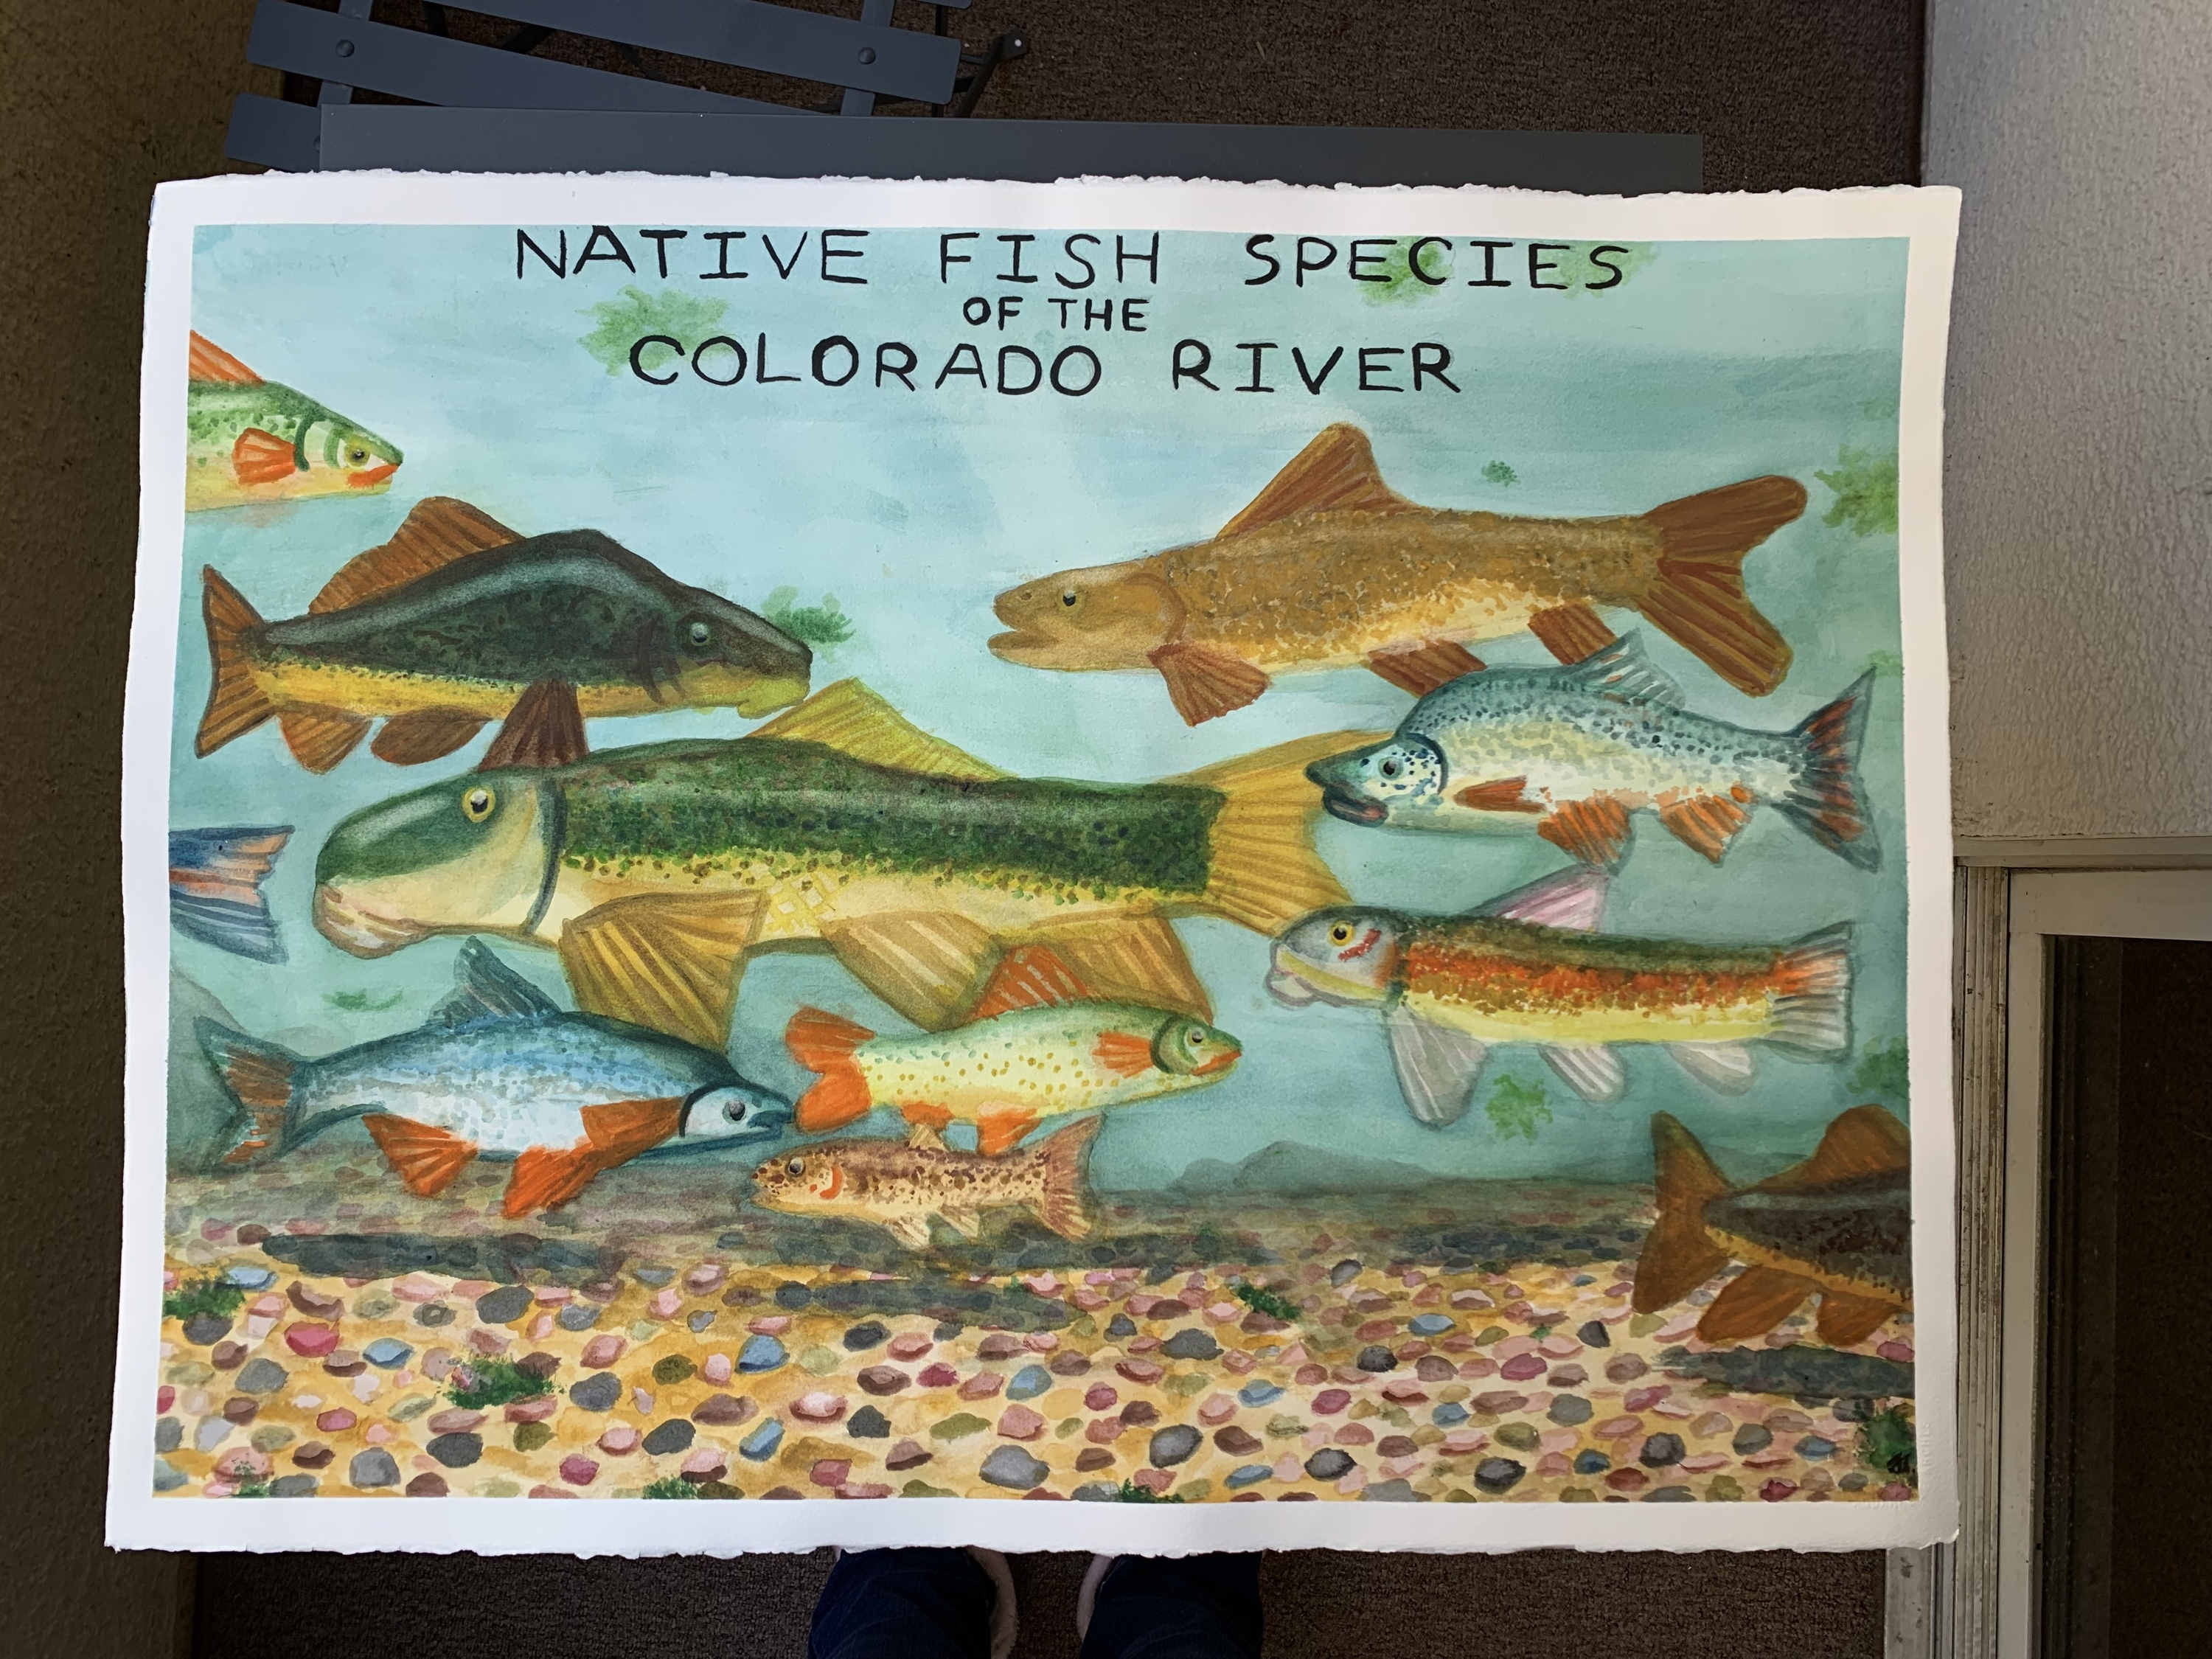 A watercolor poster featuring a school of various fish native to the Colorado River in a natural river scene. It looks peaceful.